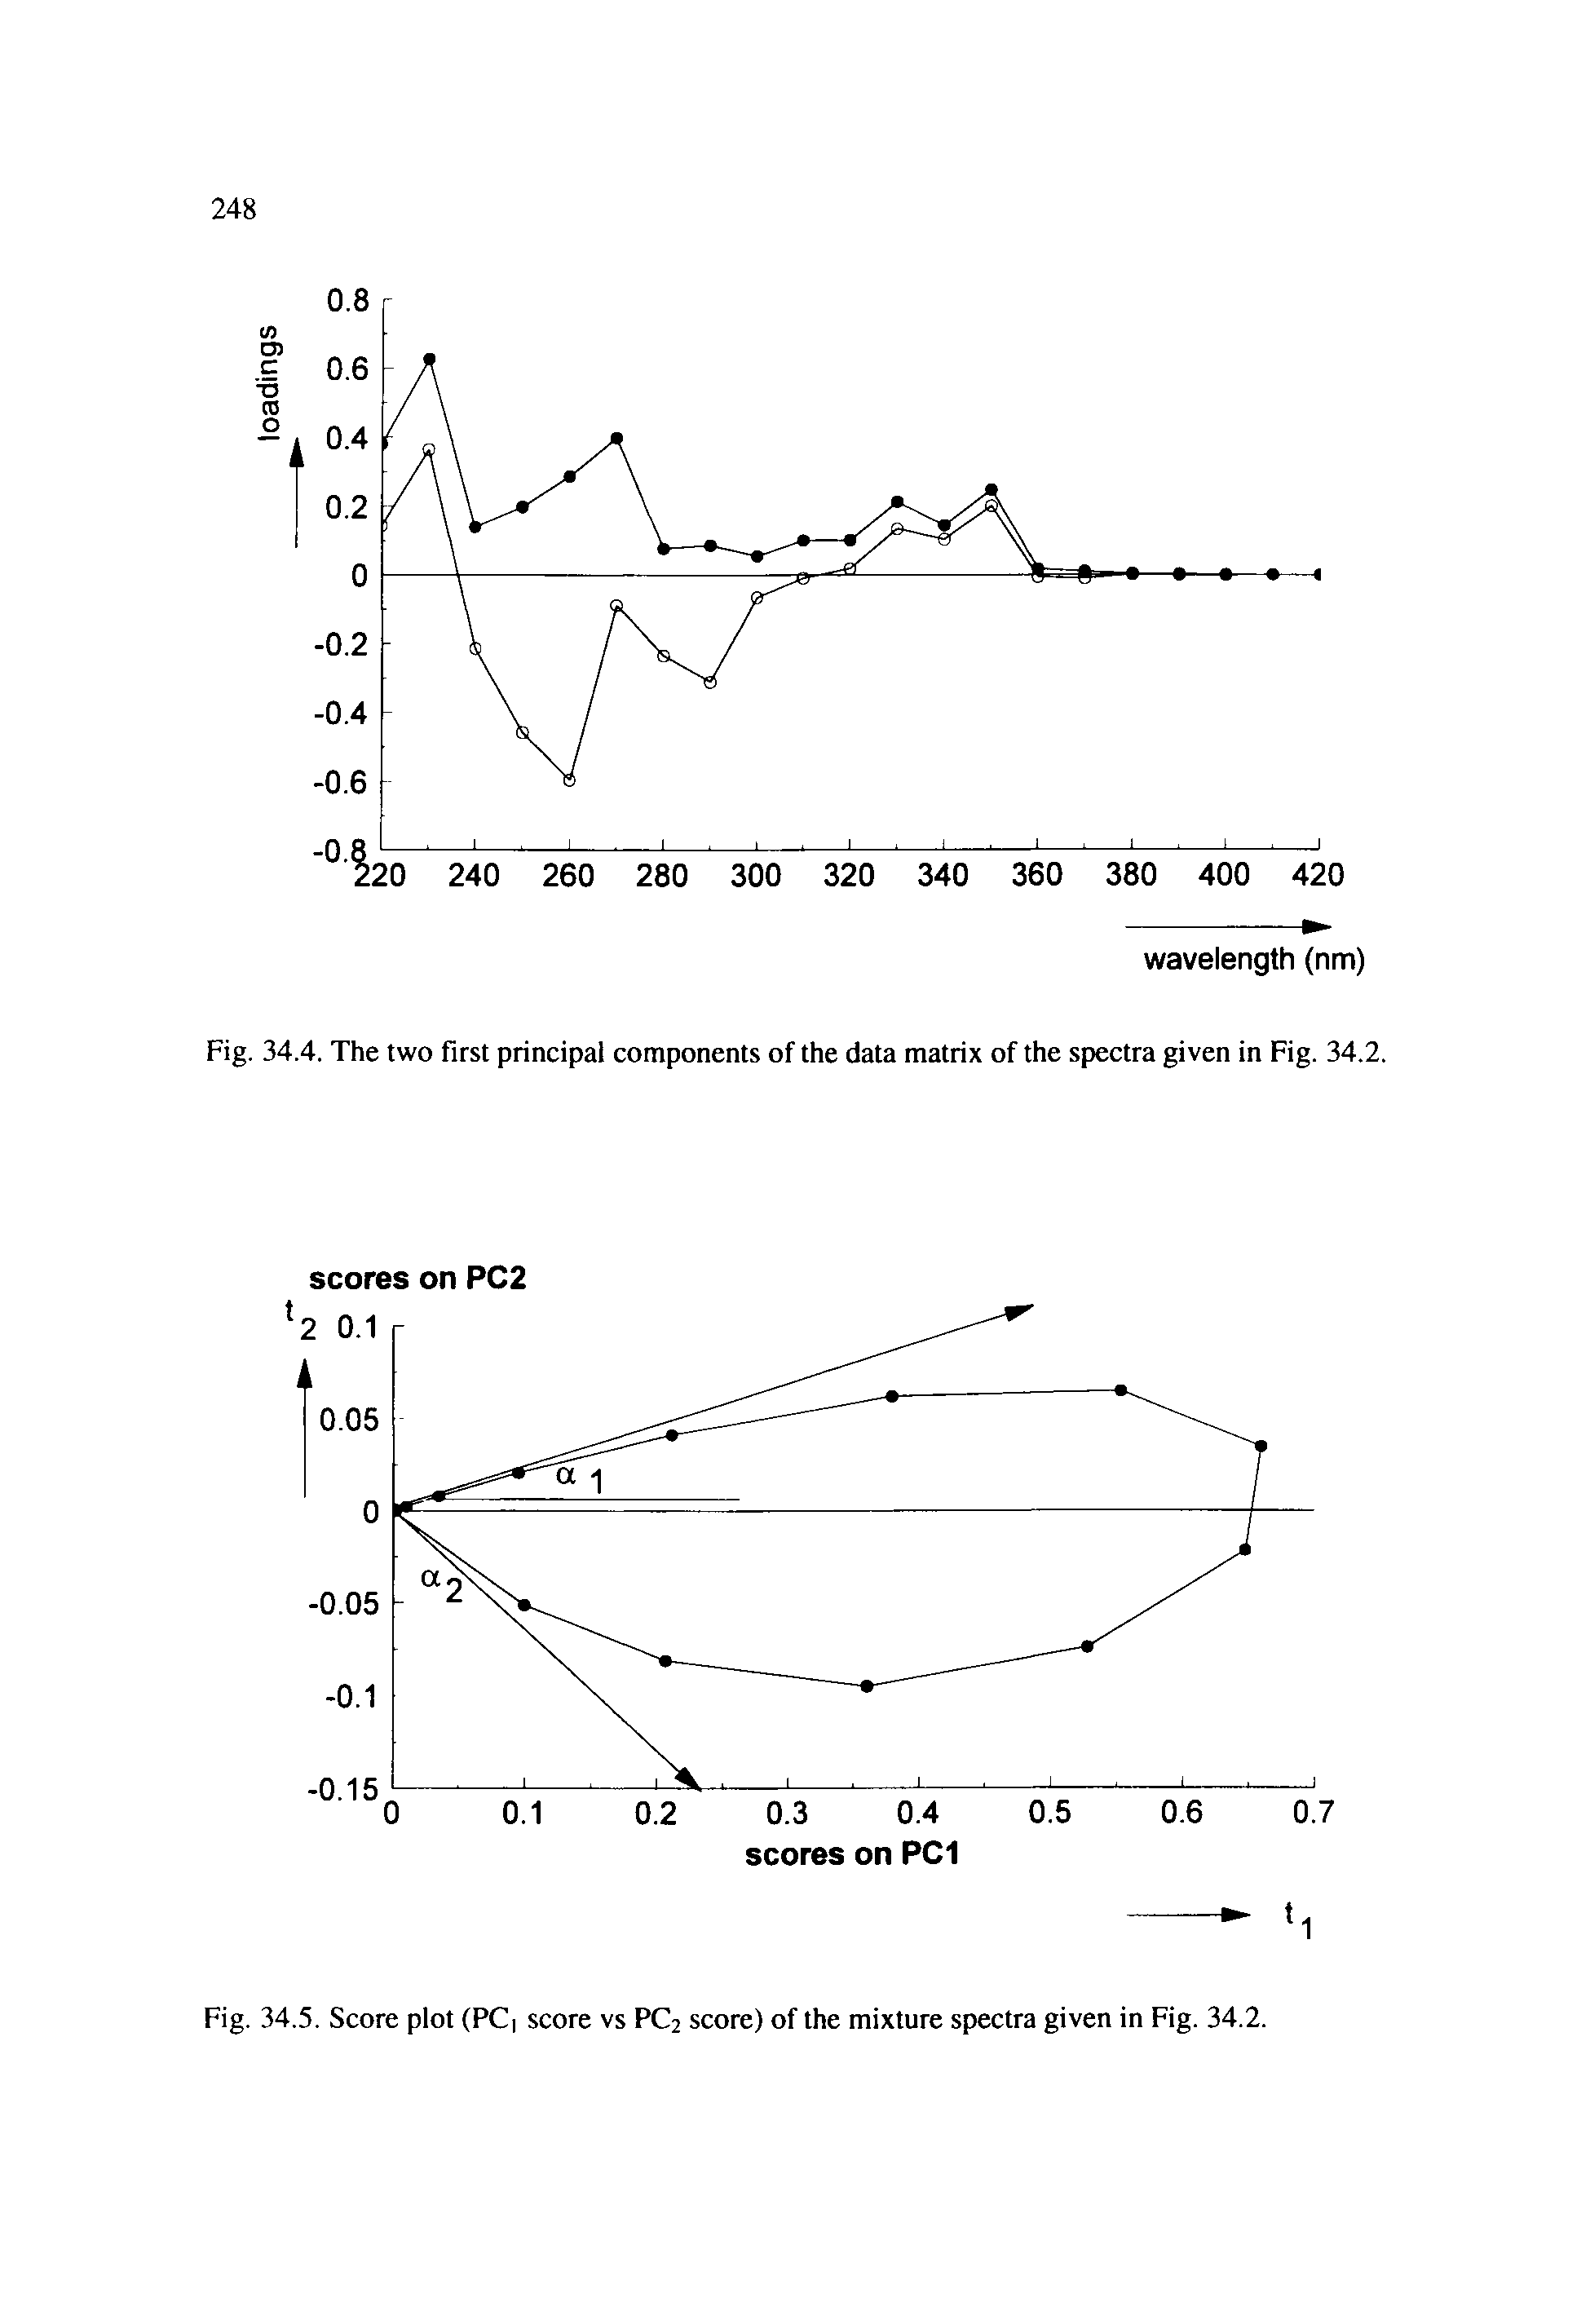 Fig. 34.4. The two first principal components of the data matrix of the spectra given in Fig. 34.2.